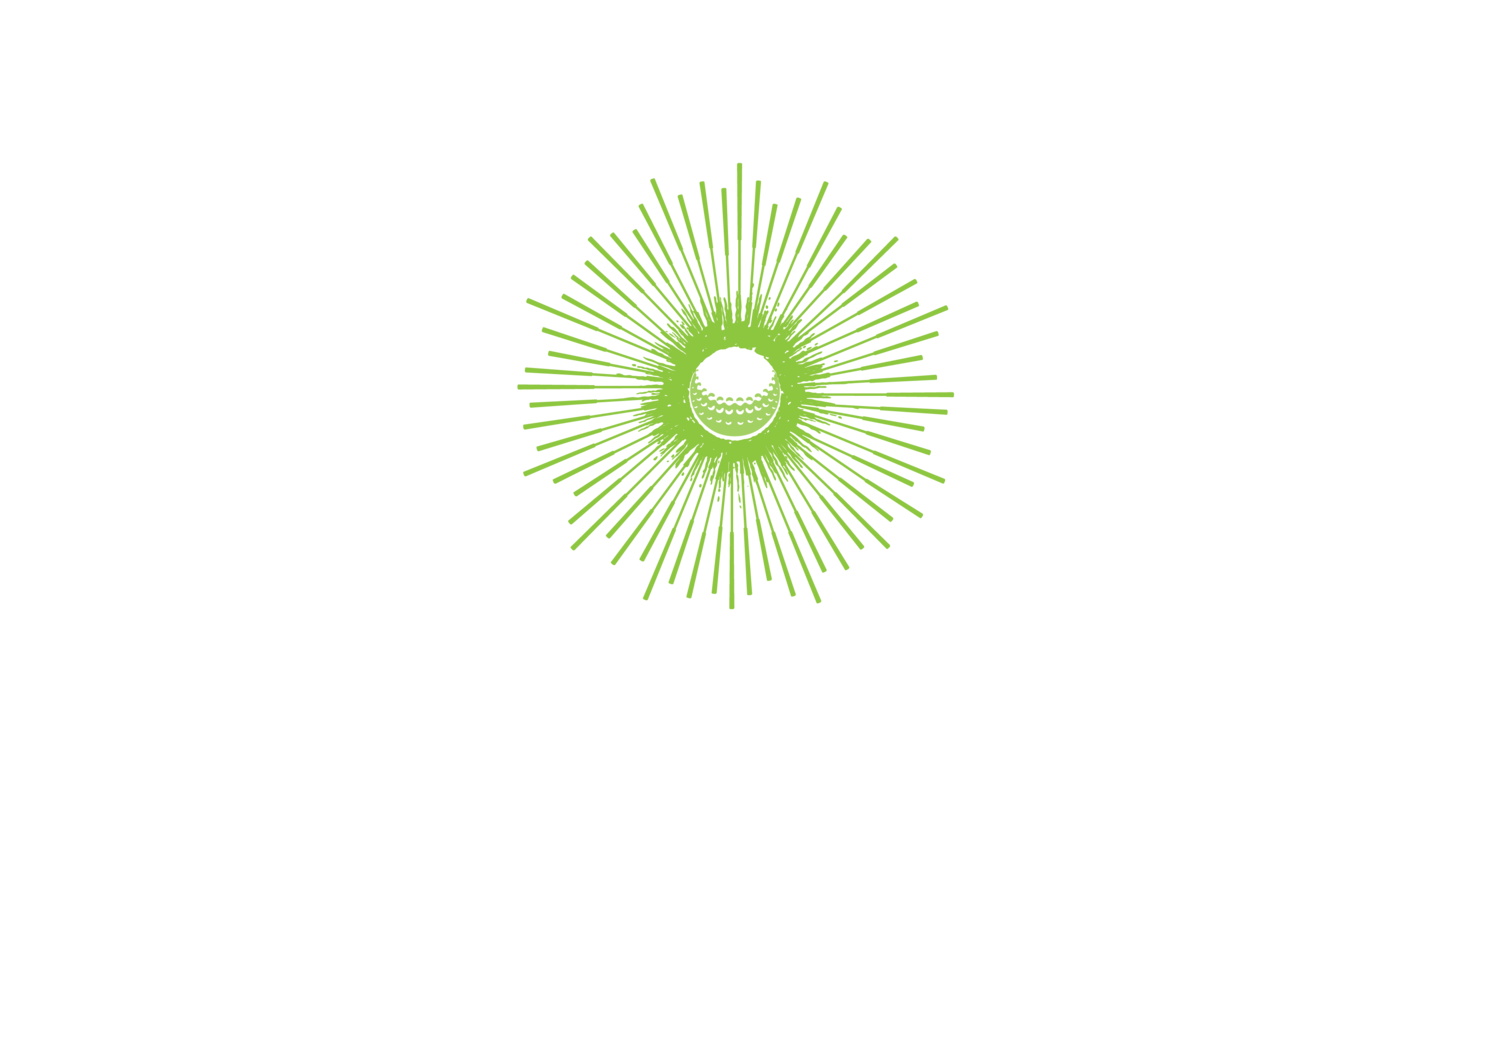 Welcome to Royal Hills Golf Course